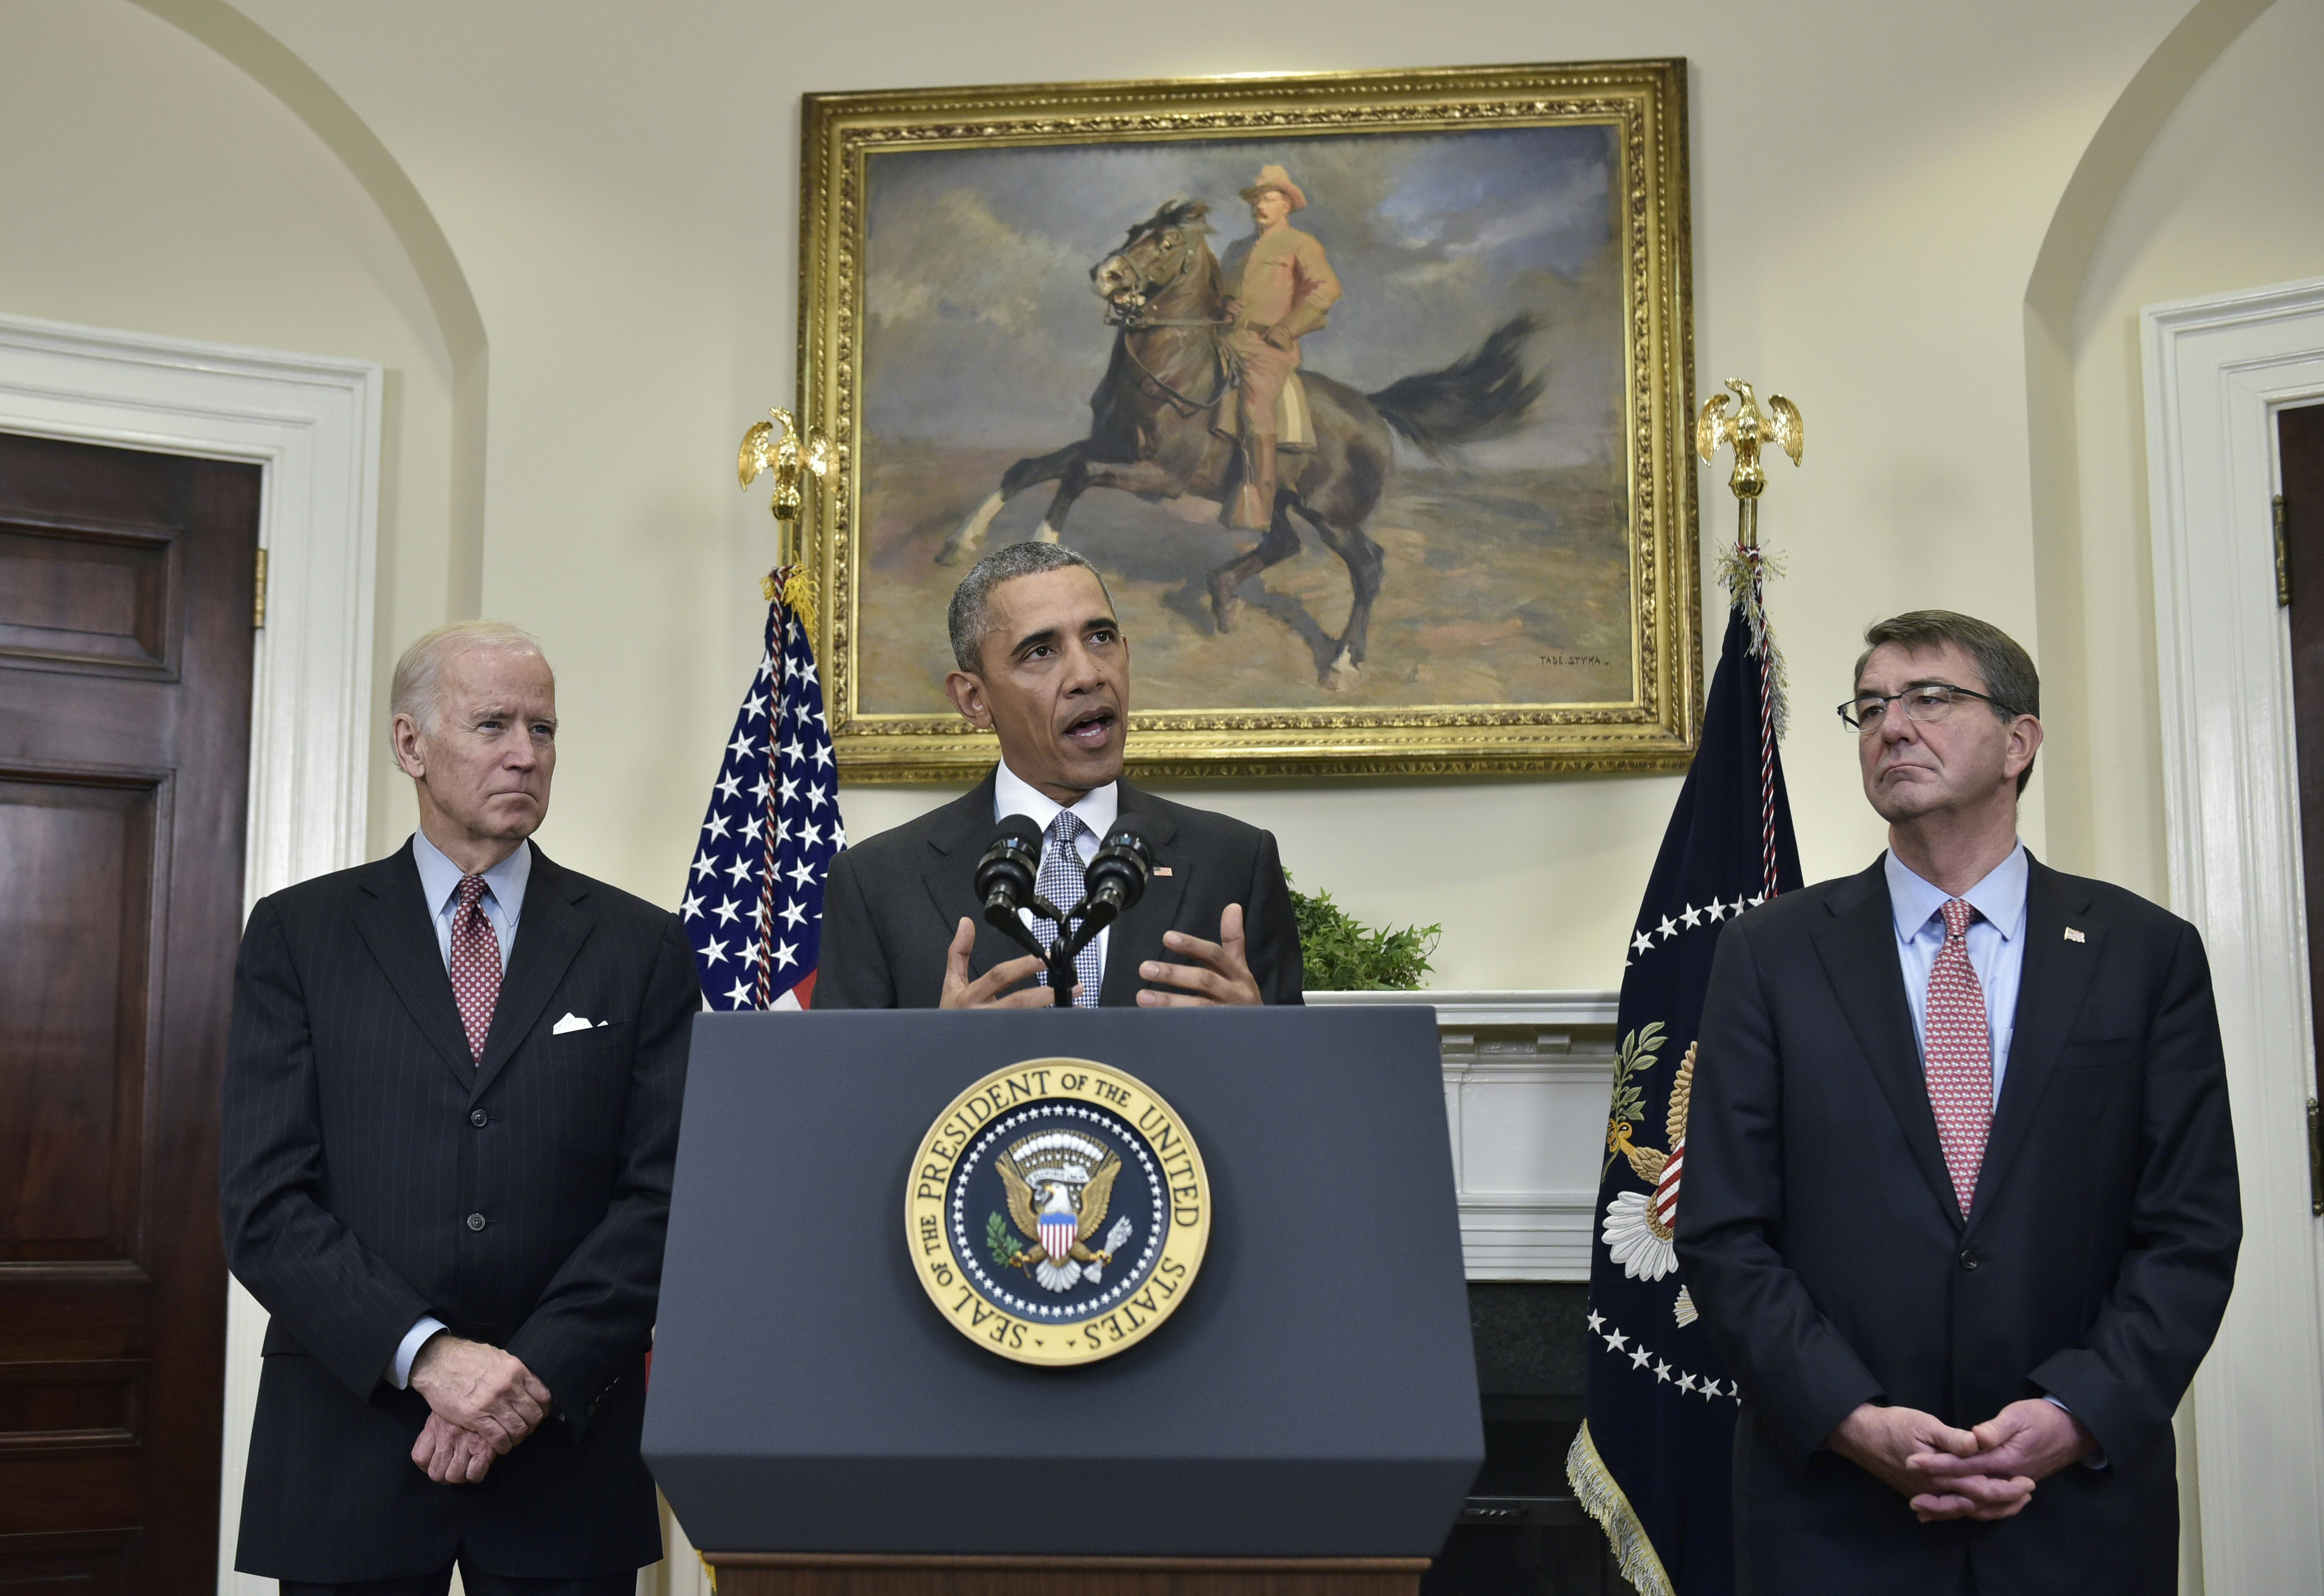 US President Barack Obama delivers a statement on the Guantanamo Bay detention camp flanked by US Vice President Joe Biden (L) and Defense Secretary Ashton Carter on February 23, 2016 in the Roosevelt Room of the White House in Washington, DC. President Barack Obama on February 23 took his case for closing the Guantanamo military prison to the American people, saying it was time to shutter a facility that betrayed US interests and values. A total of 91 suspected jihadists remain at Guantanamo, a prison that once housed about 700 inmates at its peak and has become synonymous around the world with torture, indefinite detention and orange jumpsuits. / AFP / Mandel Ngan        (Photo credit should read MANDEL NGAN/AFP/Getty Images)